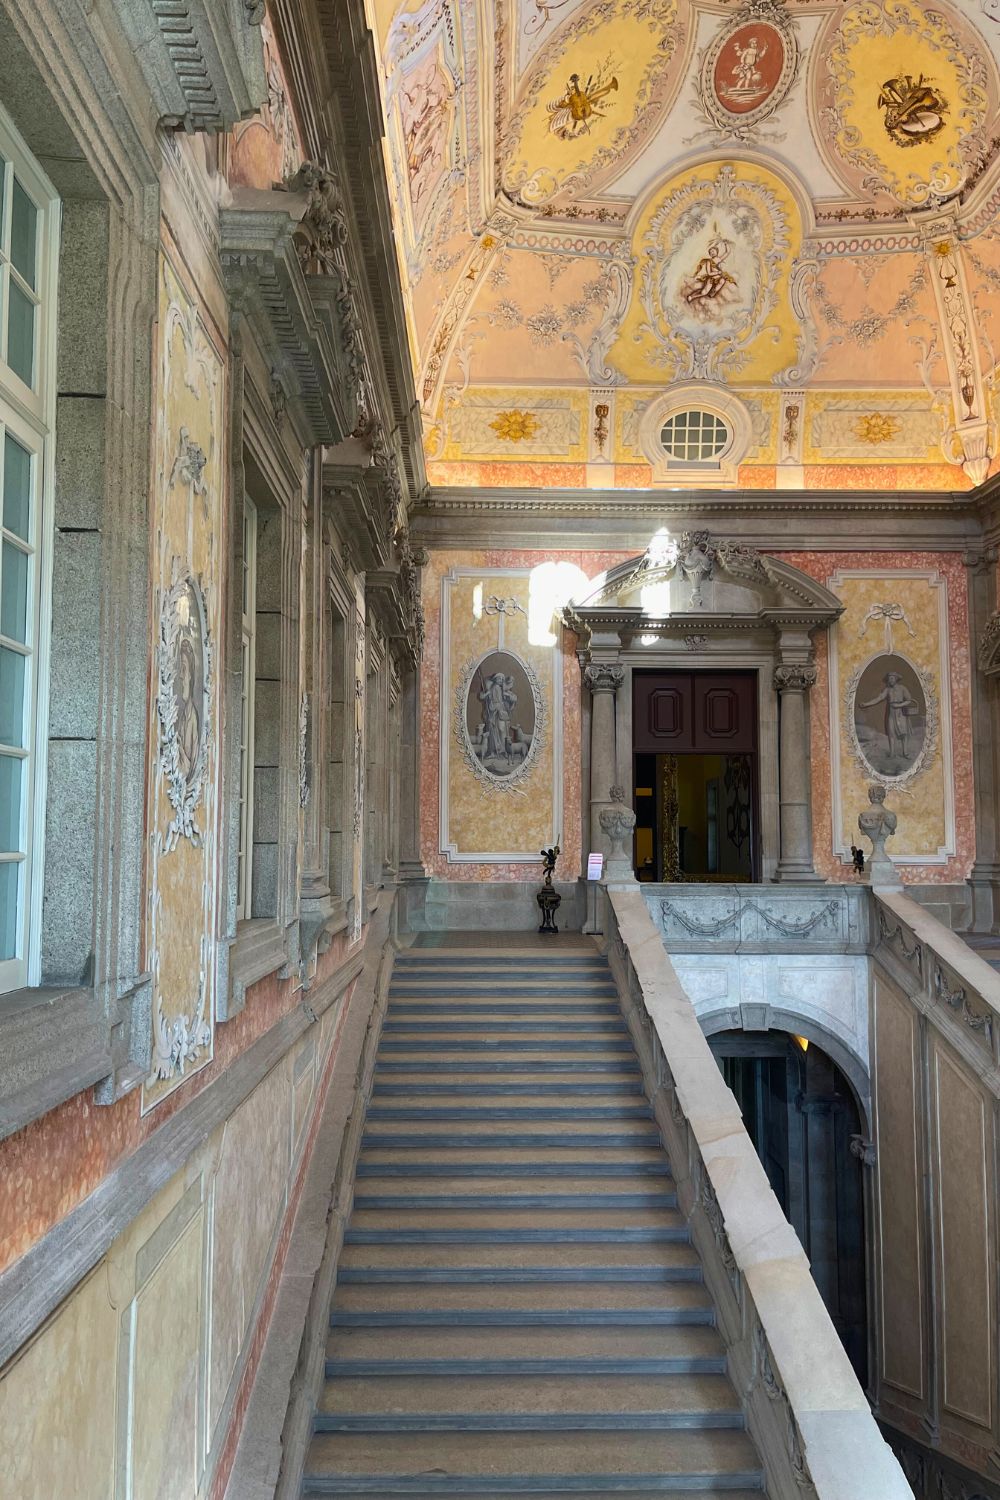 Grand staircase in a historic building in Porto with intricate stucco work, leading to an ornately decorated ceiling with golden motifs and pastel frescoes.